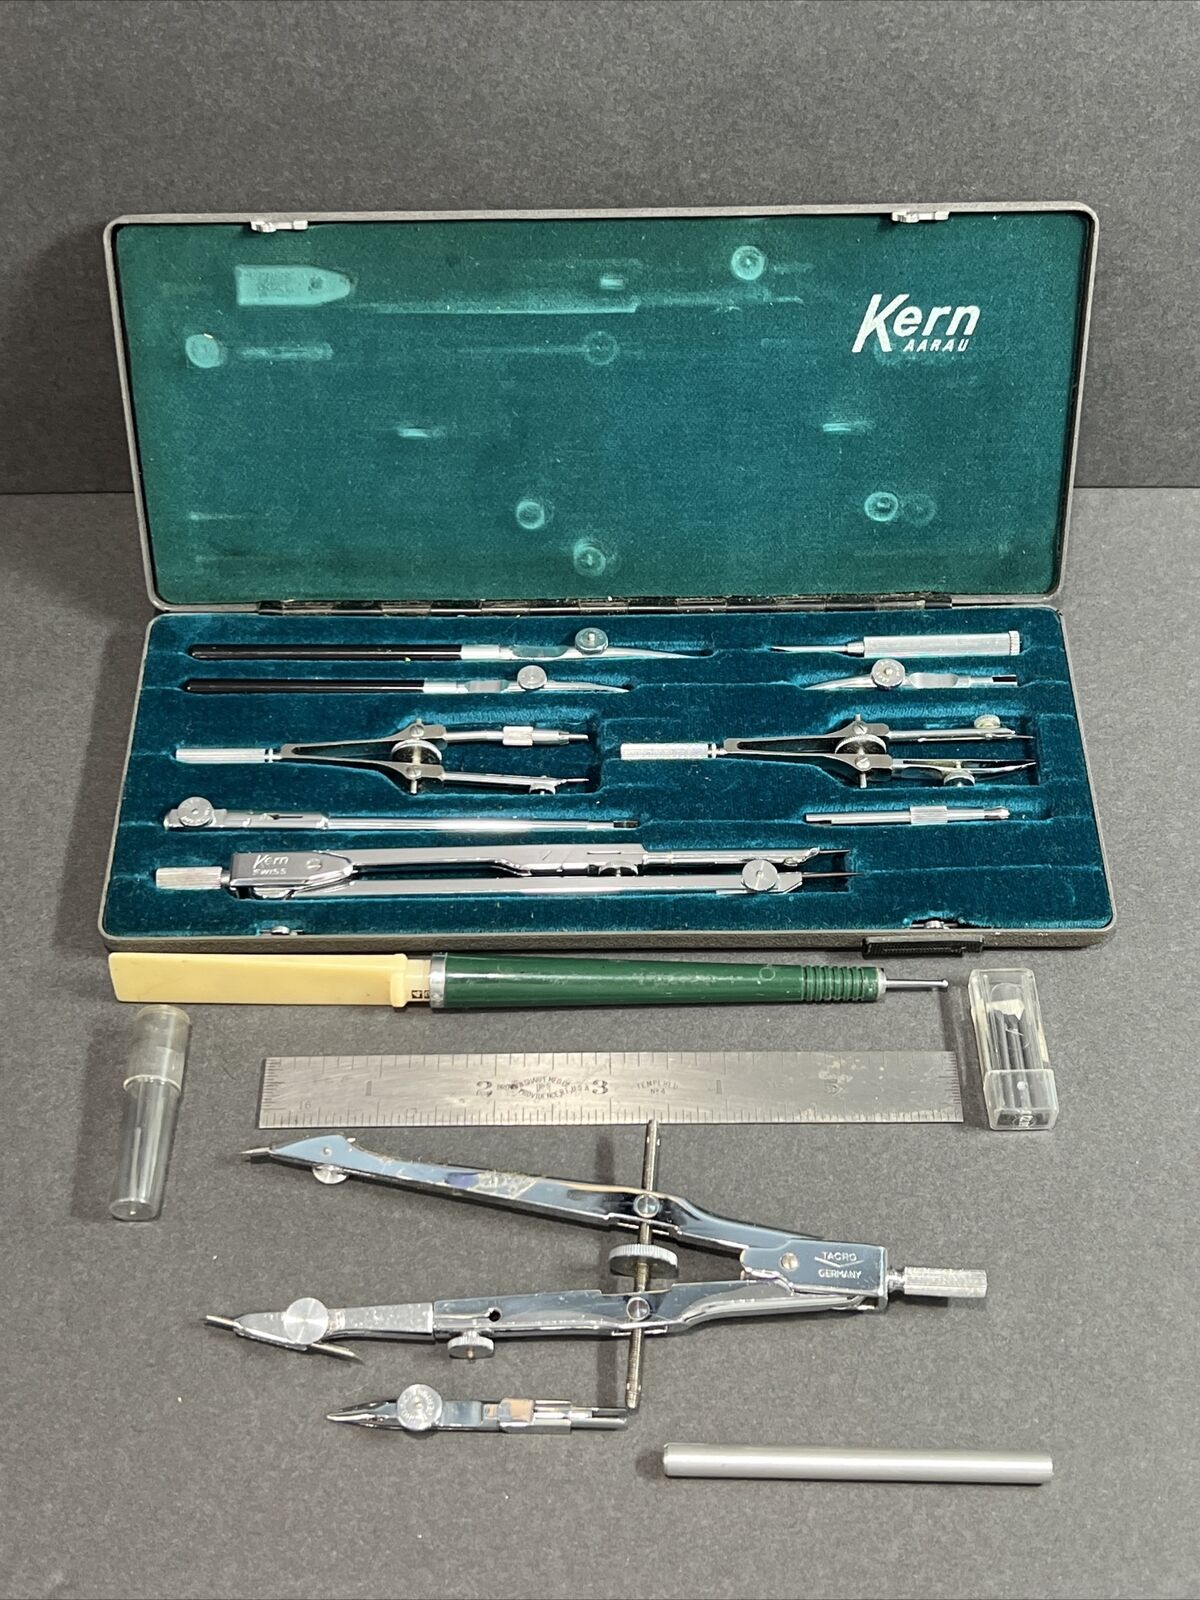 Kern AARAU A15 Swiss Drafting Chrome Instrument set Excellent Condition + Extras